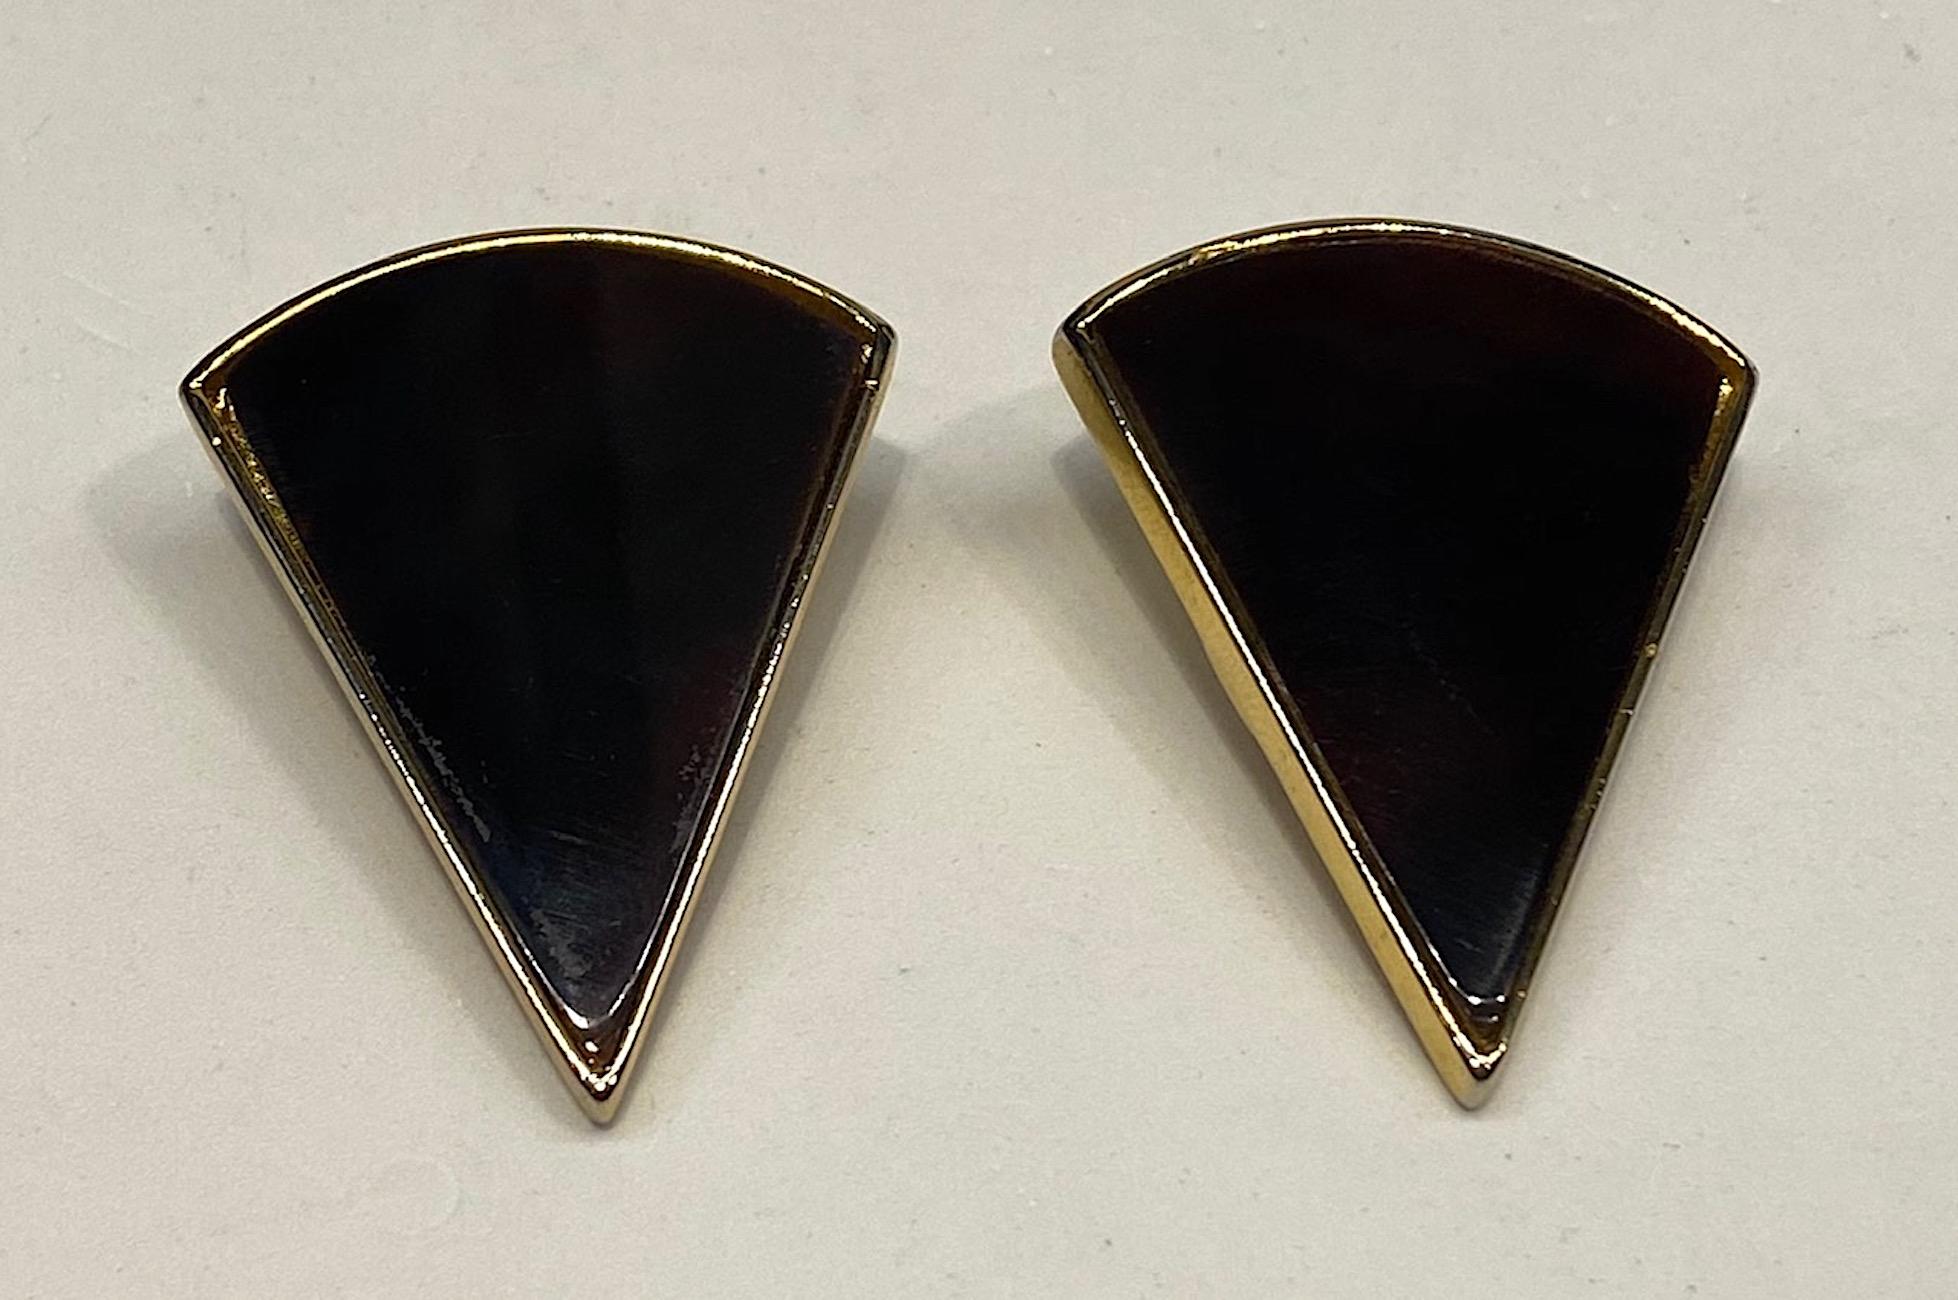 A stunning pair of 1980s pie shape clip earrings by Italian designer Rita Frascione of Firenze, Italy. The gold tone earrings are 1.5 inches wide and 2 inches long. Each is inset with a pie shape dark caramel and chocolate color glass pieces to